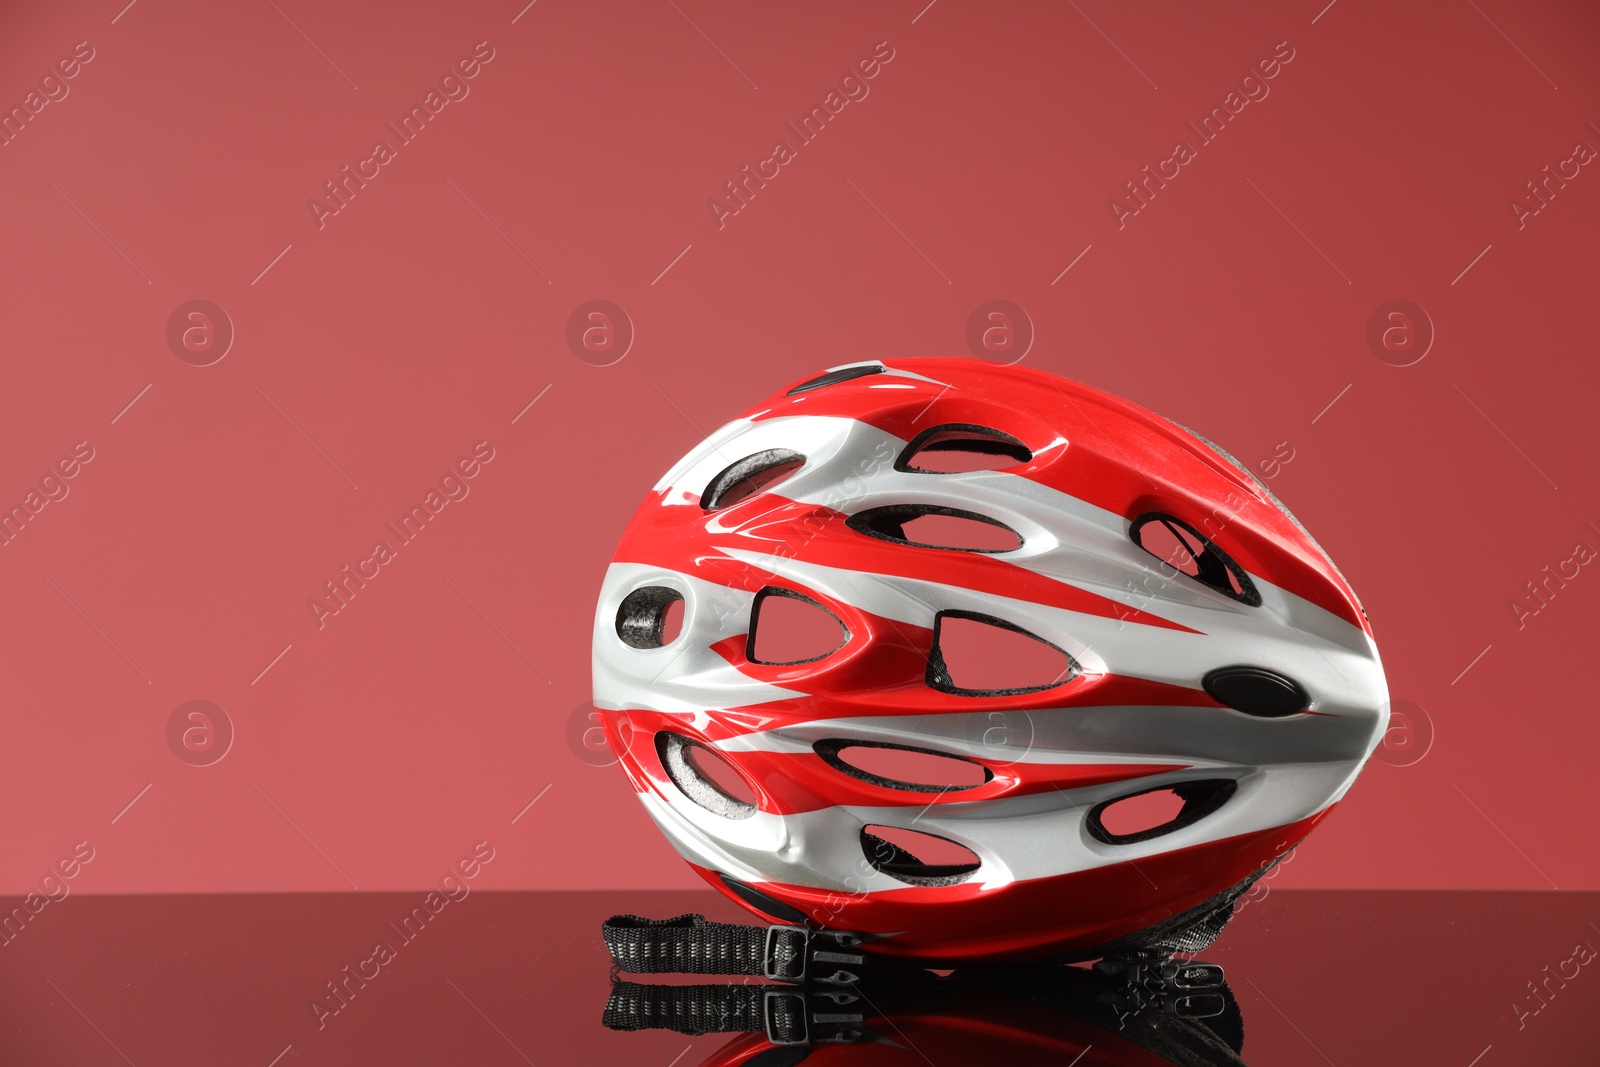 Photo of Protective helmet on mirror surface against pink background. Space for text